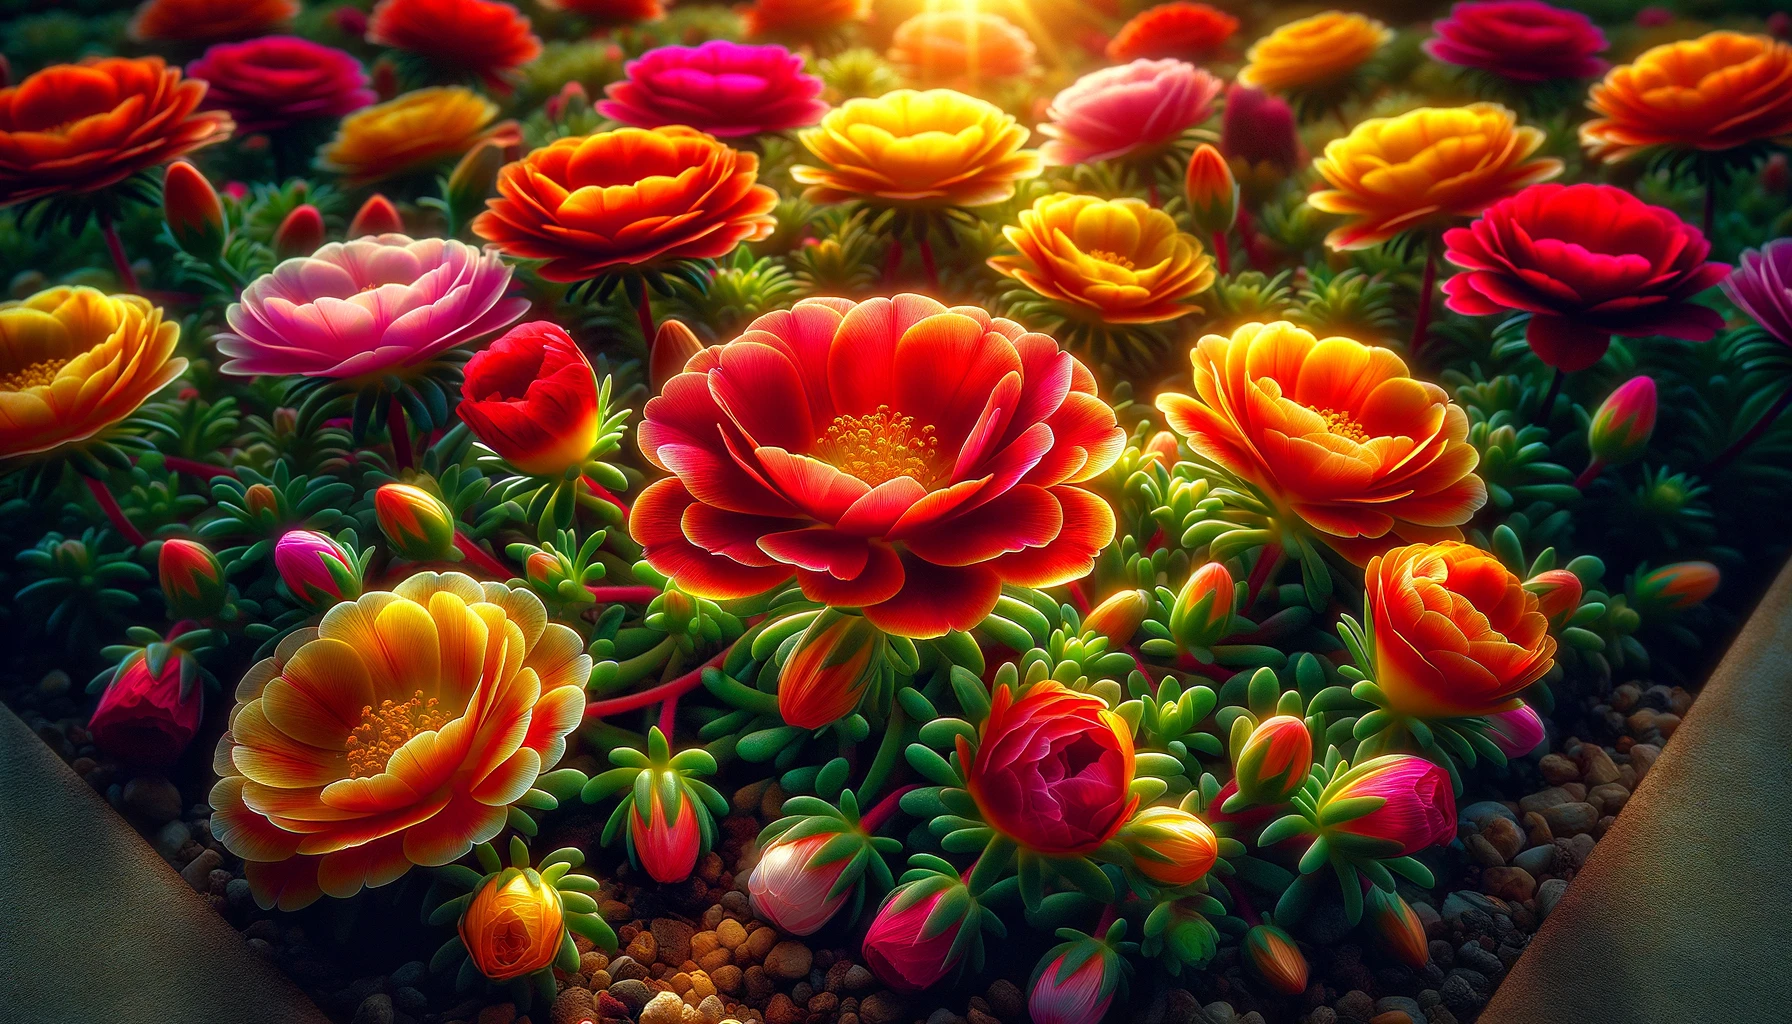 Vibrant garden of blooming colorful flowers.